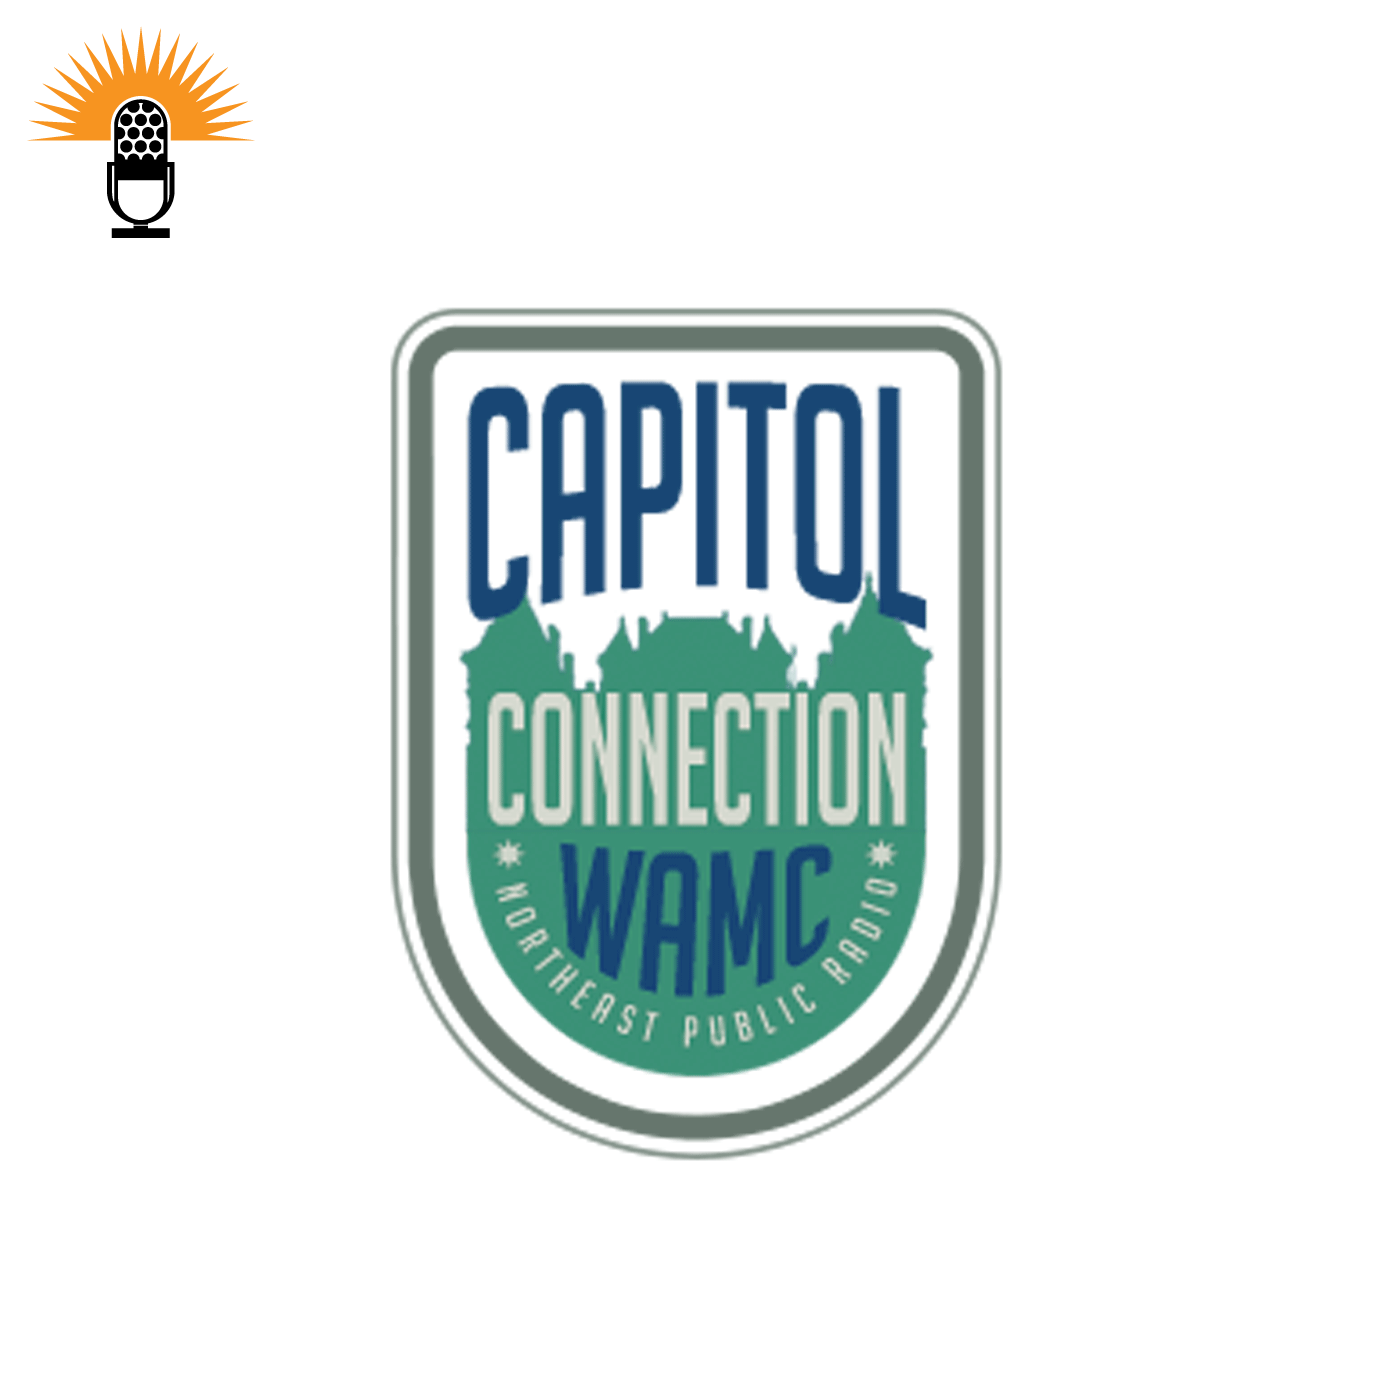 The Capitol Connection - Andrew Rein, President of the Citizens Budget Commission